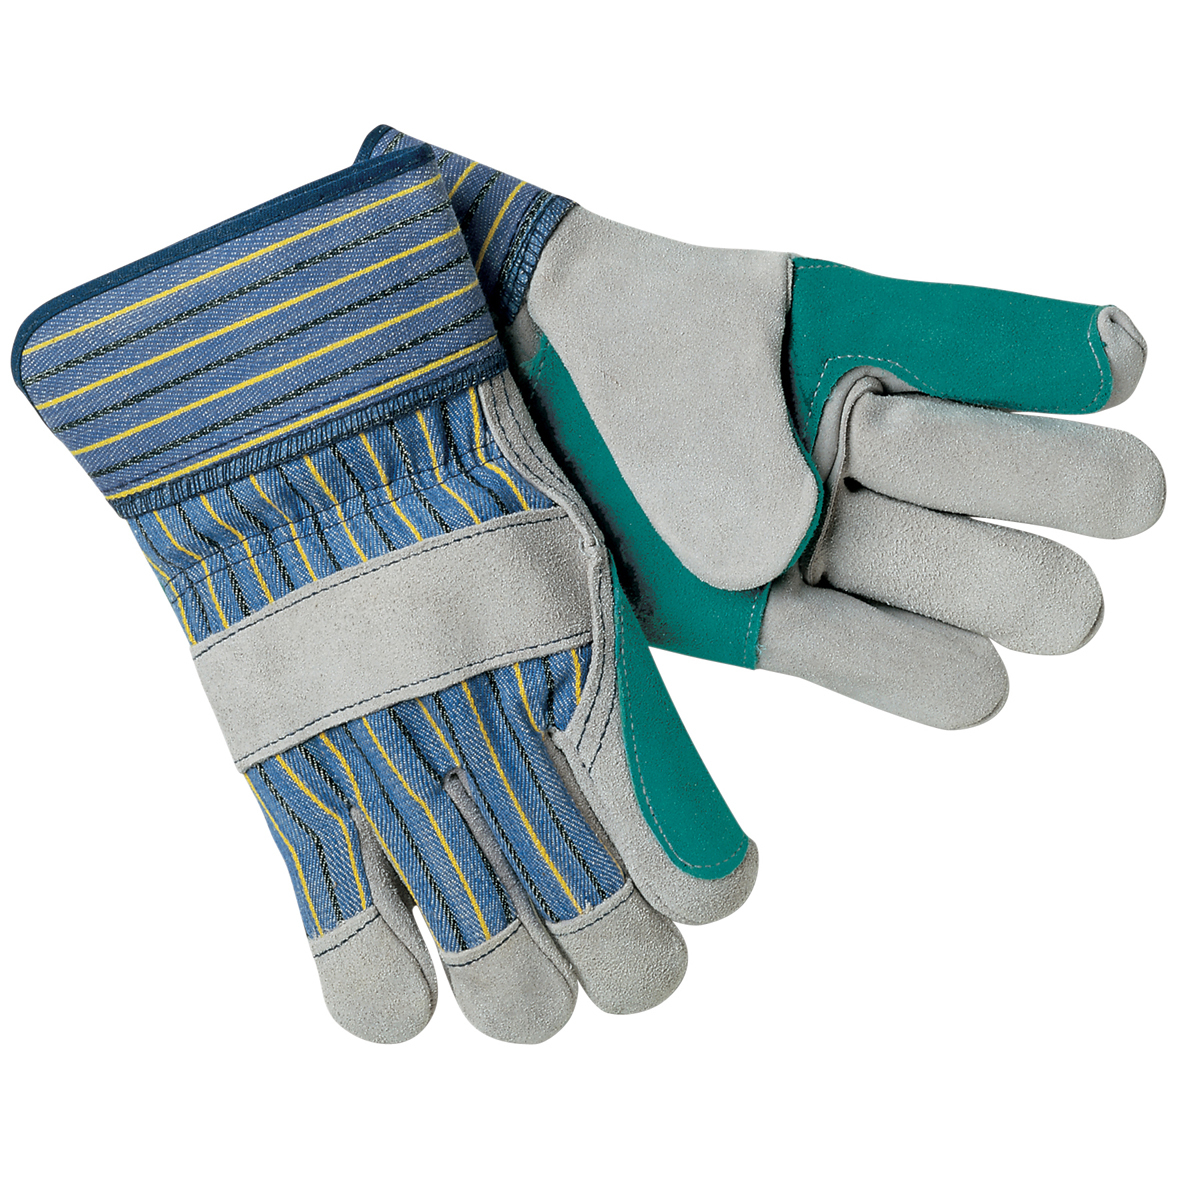 MCR Safety Large Blue, Yellow, Black And Green Select Shoulder Double Leather Palm Gloves With Fabric Back And Plasticized Safet